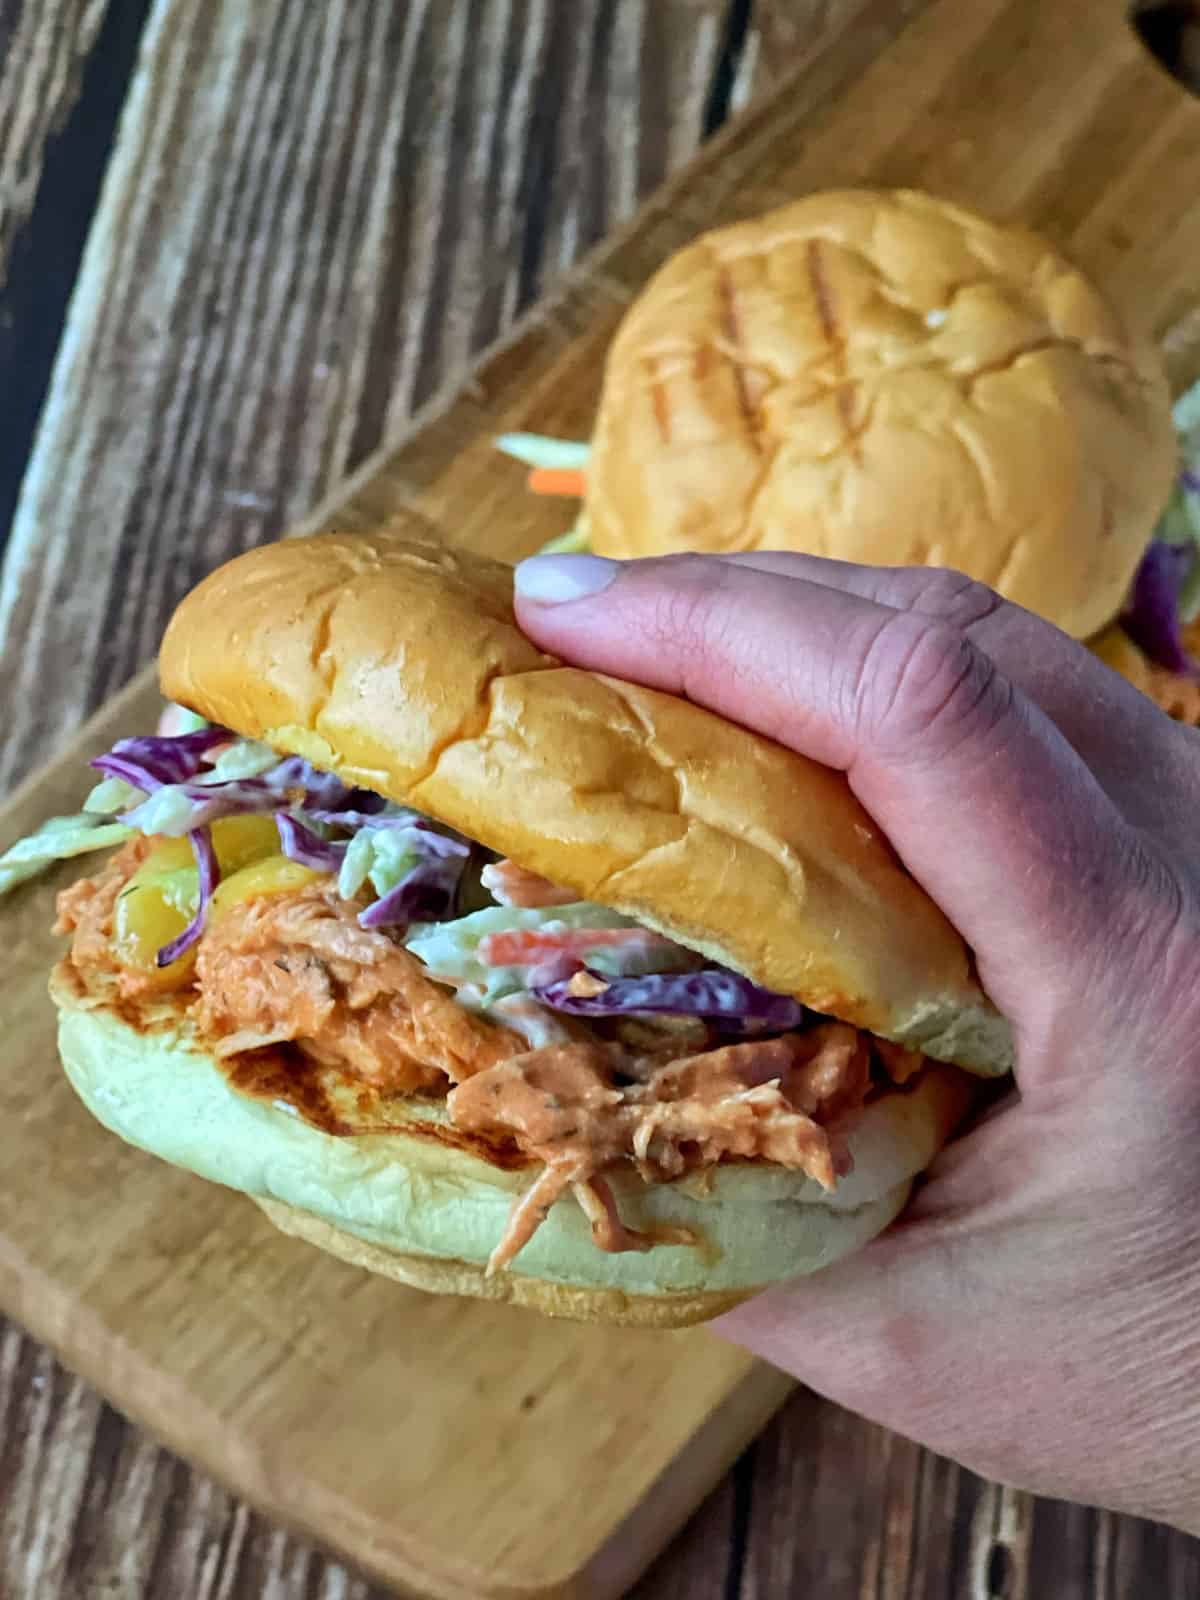 A hand holding a burger with shredded chicken and coleslaw.